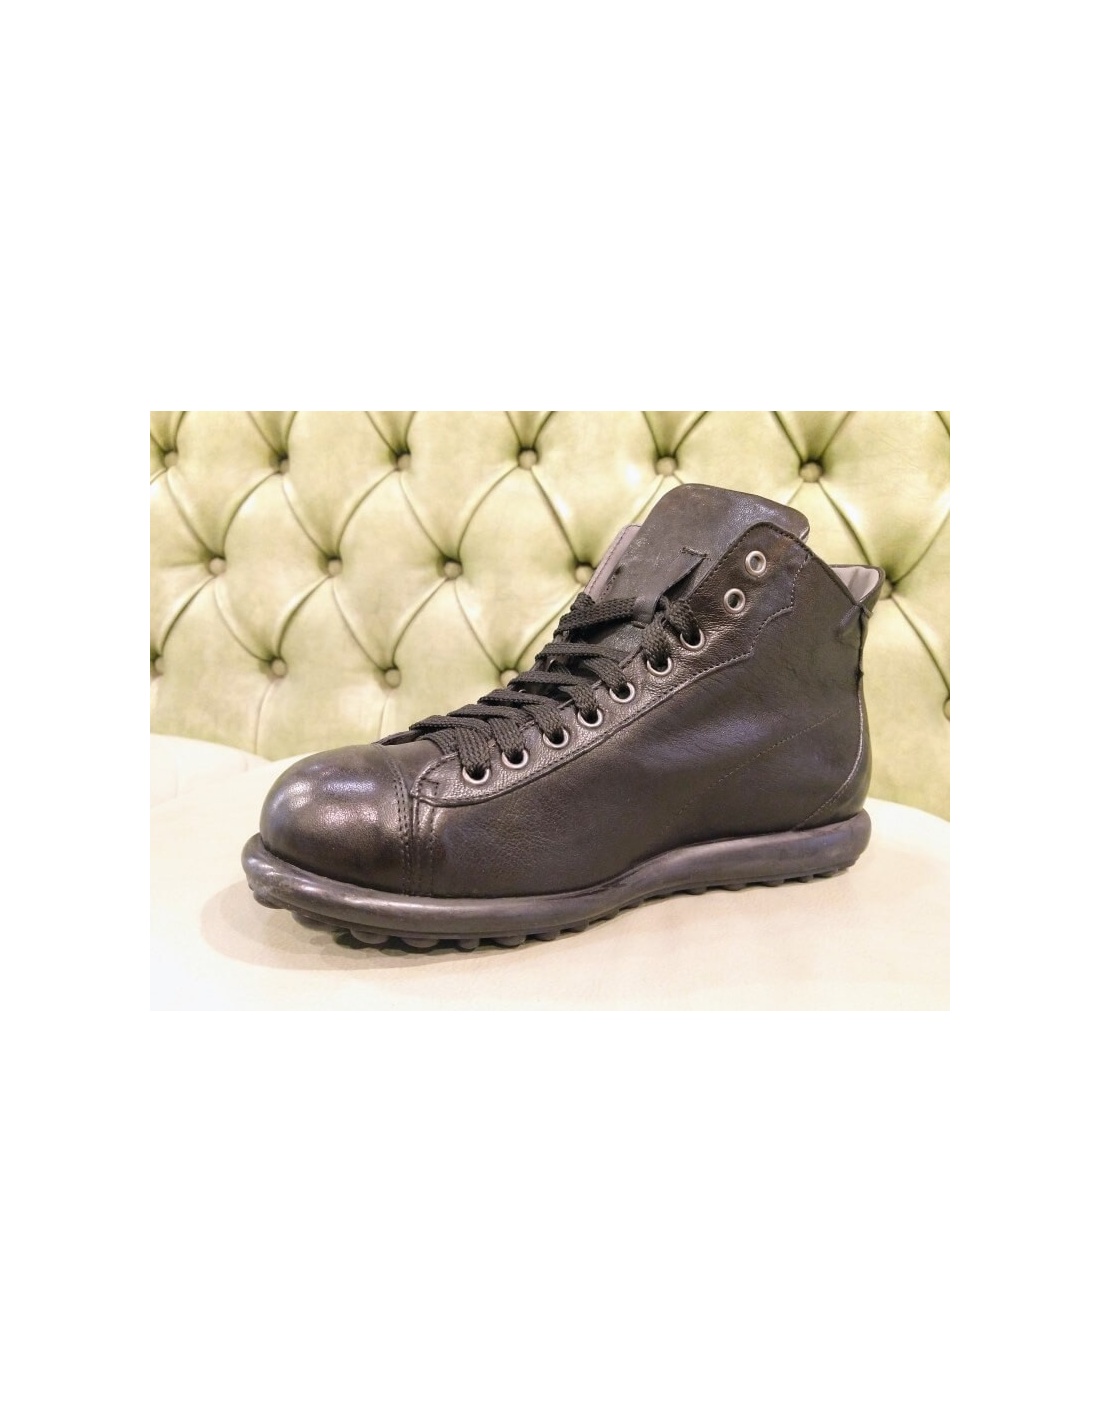 Men Winter Ankle Boots, Shoes Made in Italy